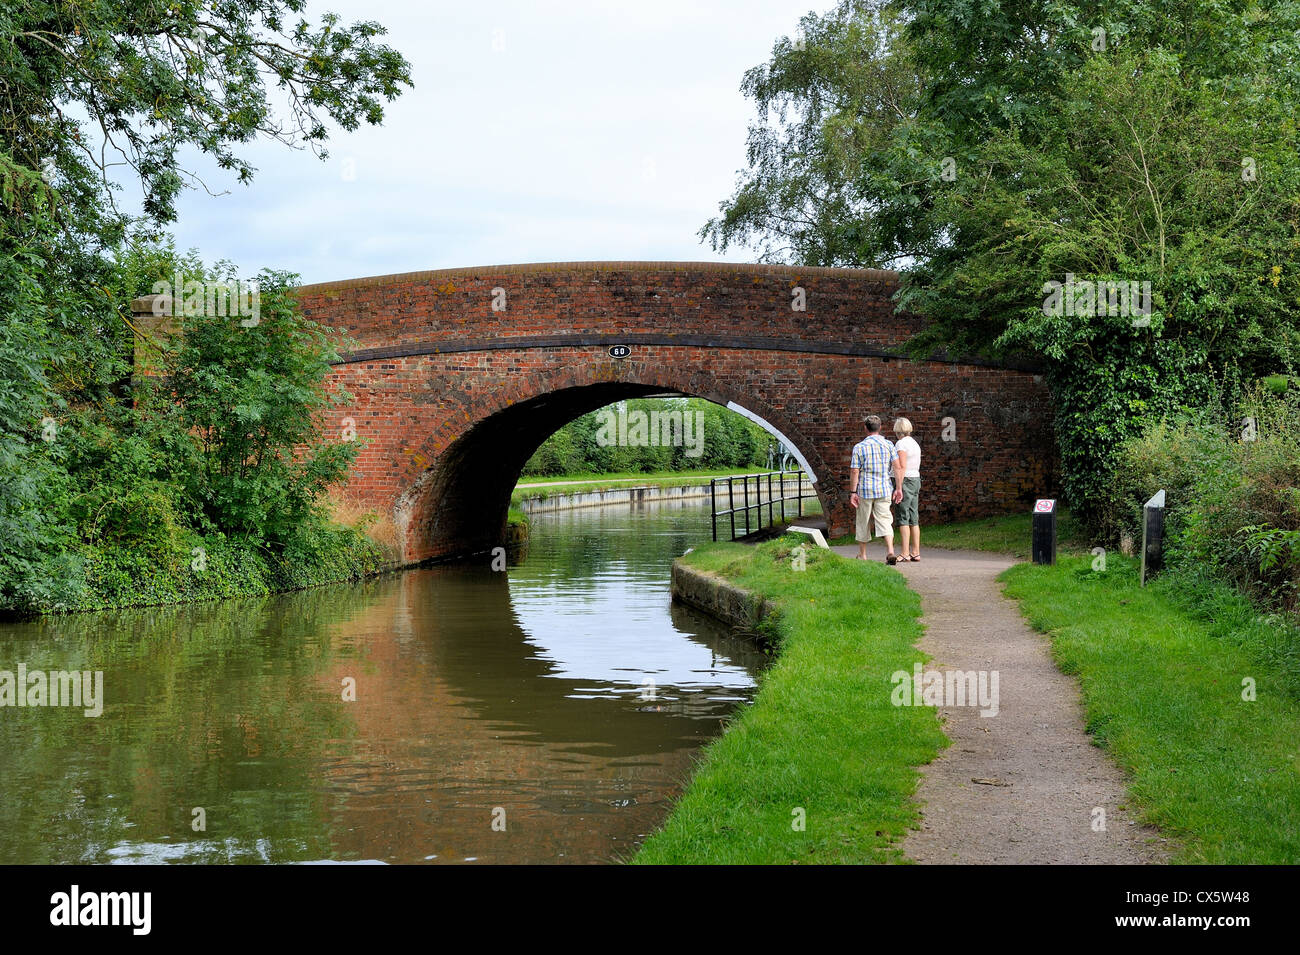 Le Grand Union canal foxton locks leicestershire angleterre uk Banque D'Images